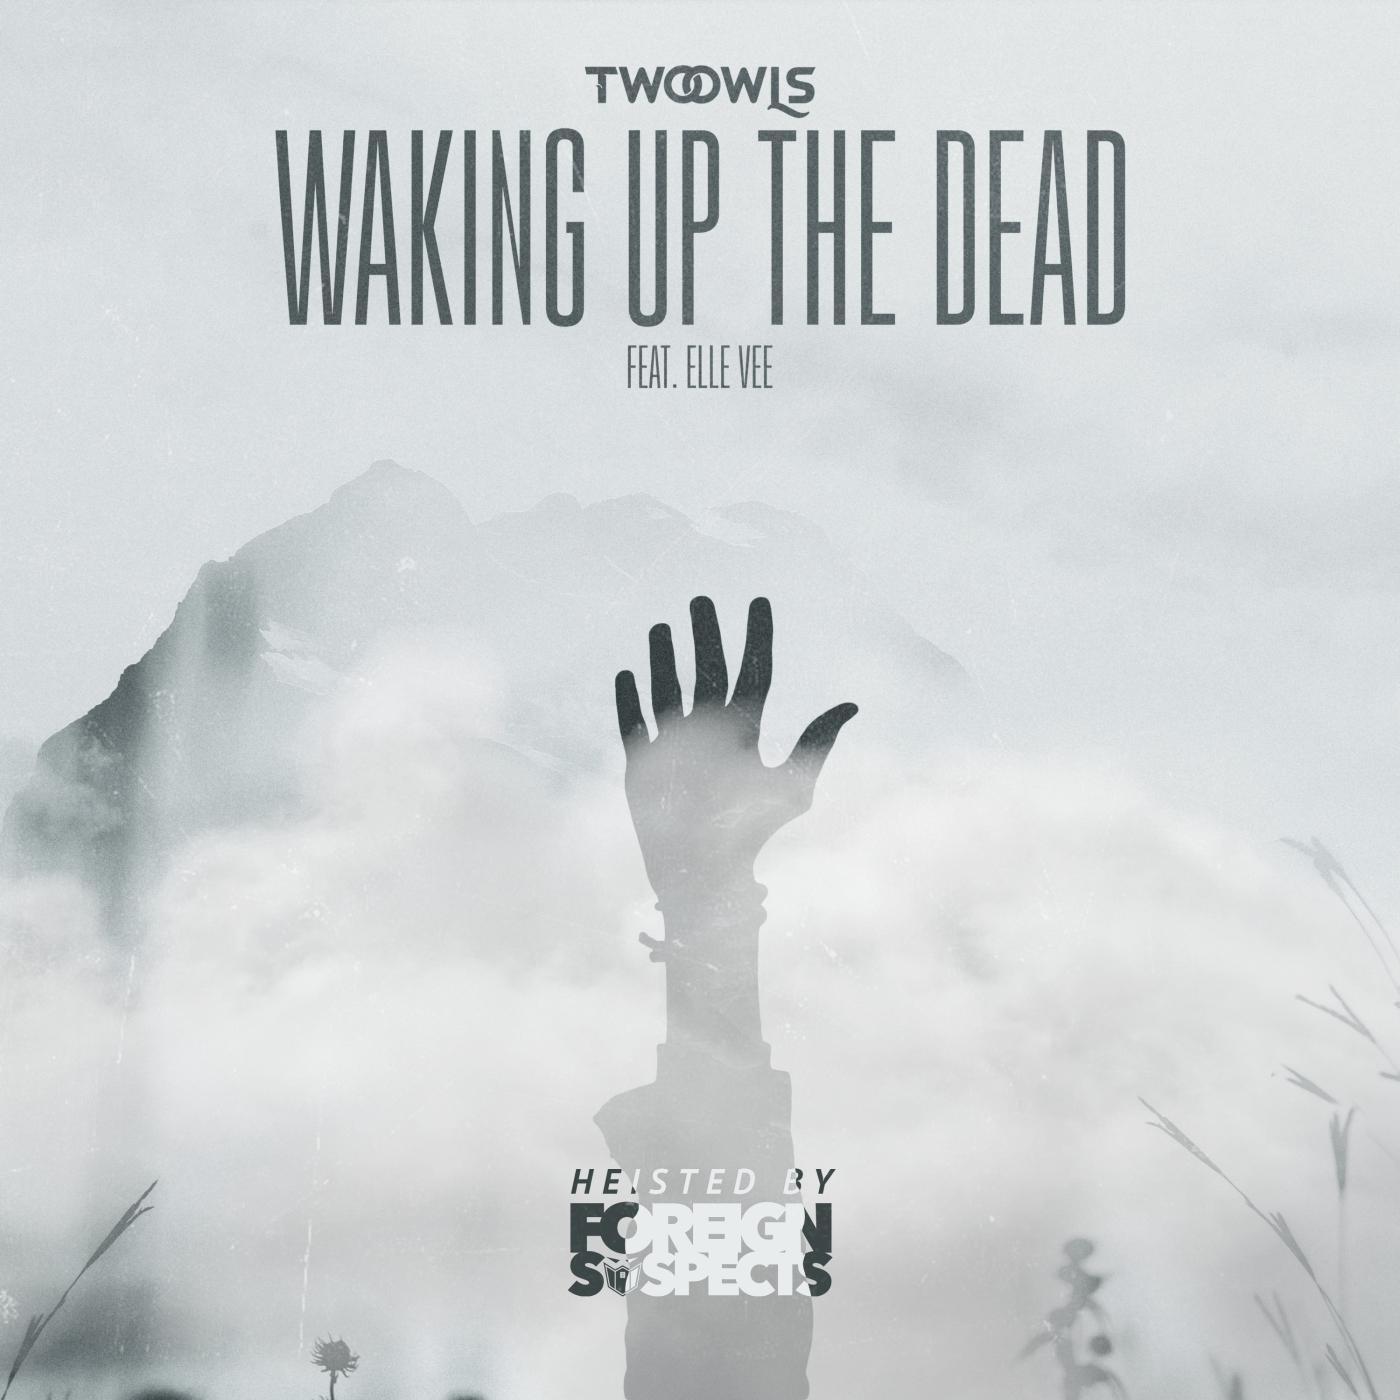 Waking Up The Dead (feat. Elle Vee) (HEISTED by Foreign Suspects)